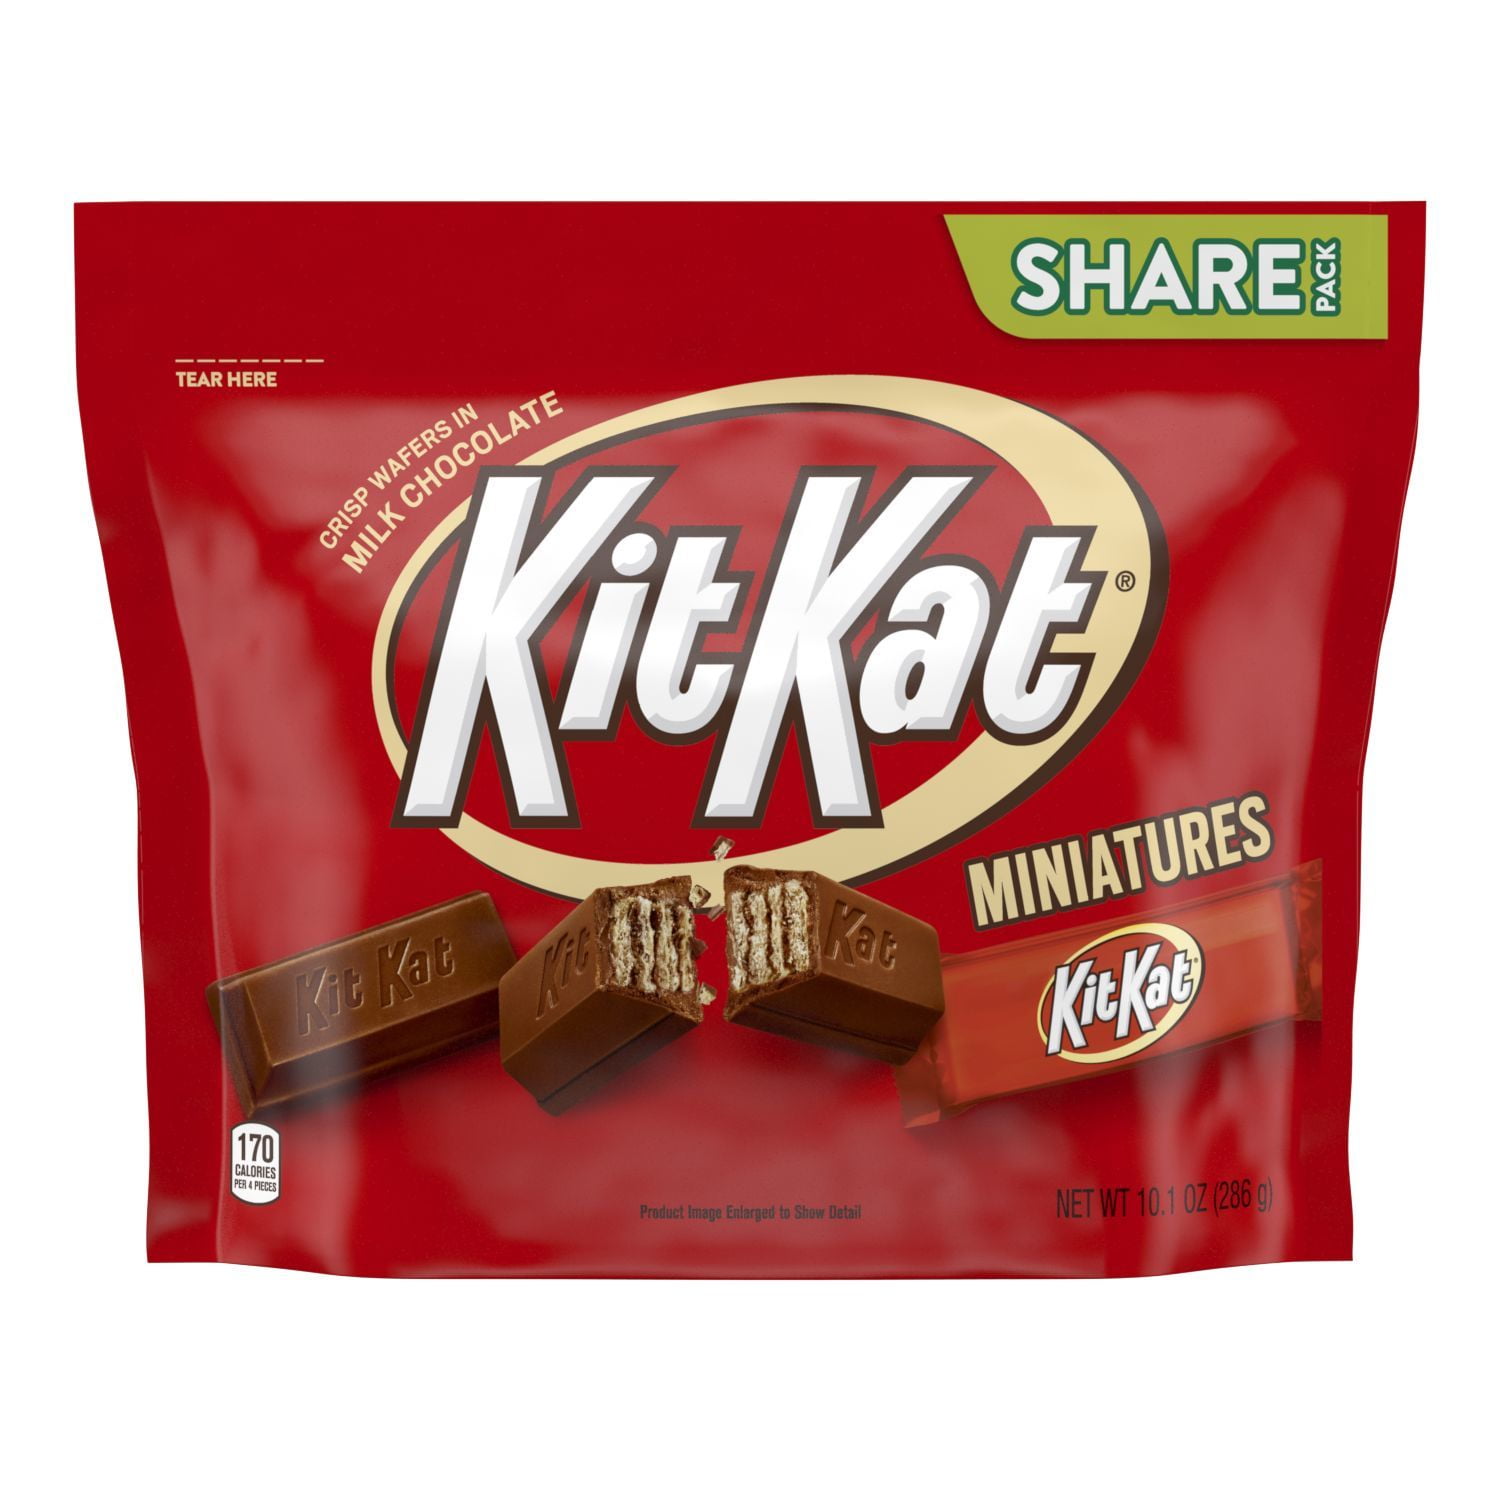 KIT KAT, Miniatures Milk Chocolate Wafer Candy Bars, Individually Wrapped, 10.1 oz, Share Pack